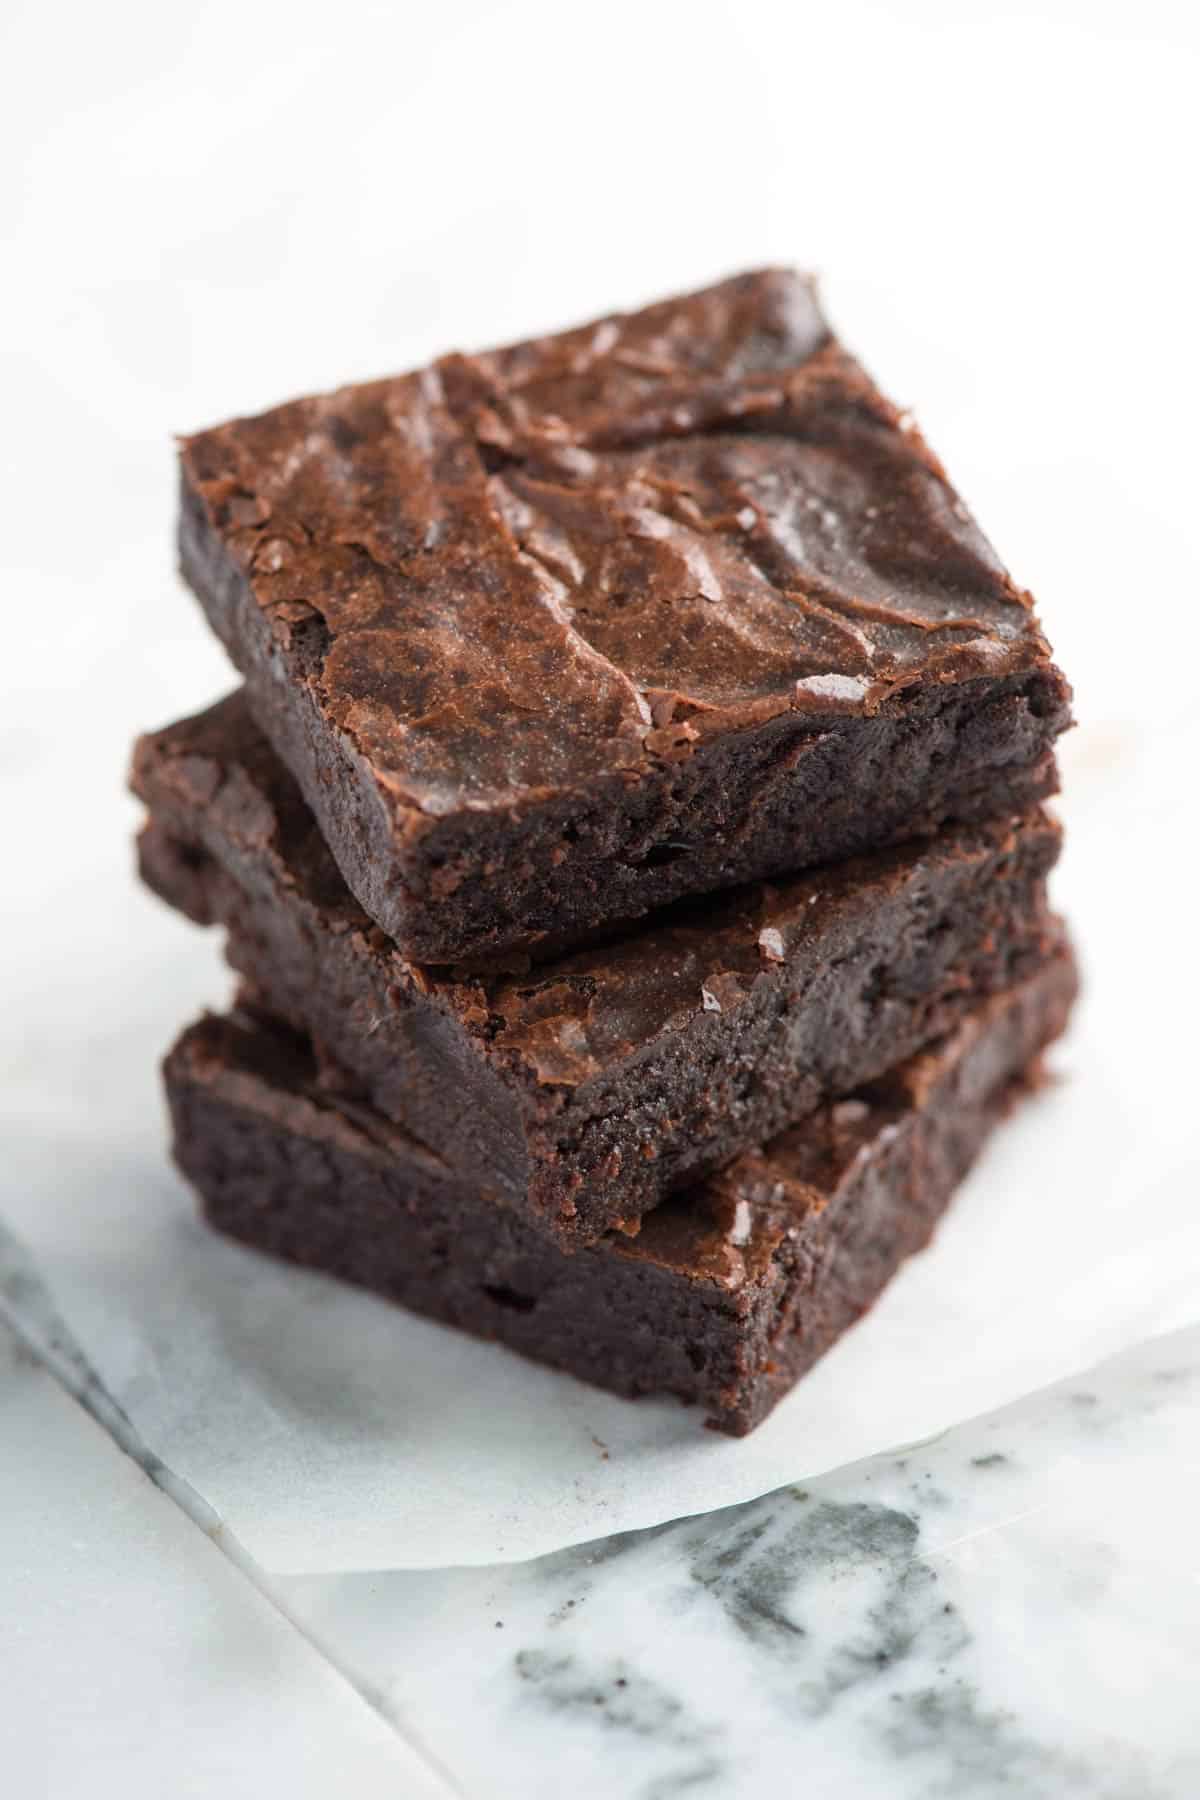 Easy Fudgy Brownies From Scratch (Our Favorite)